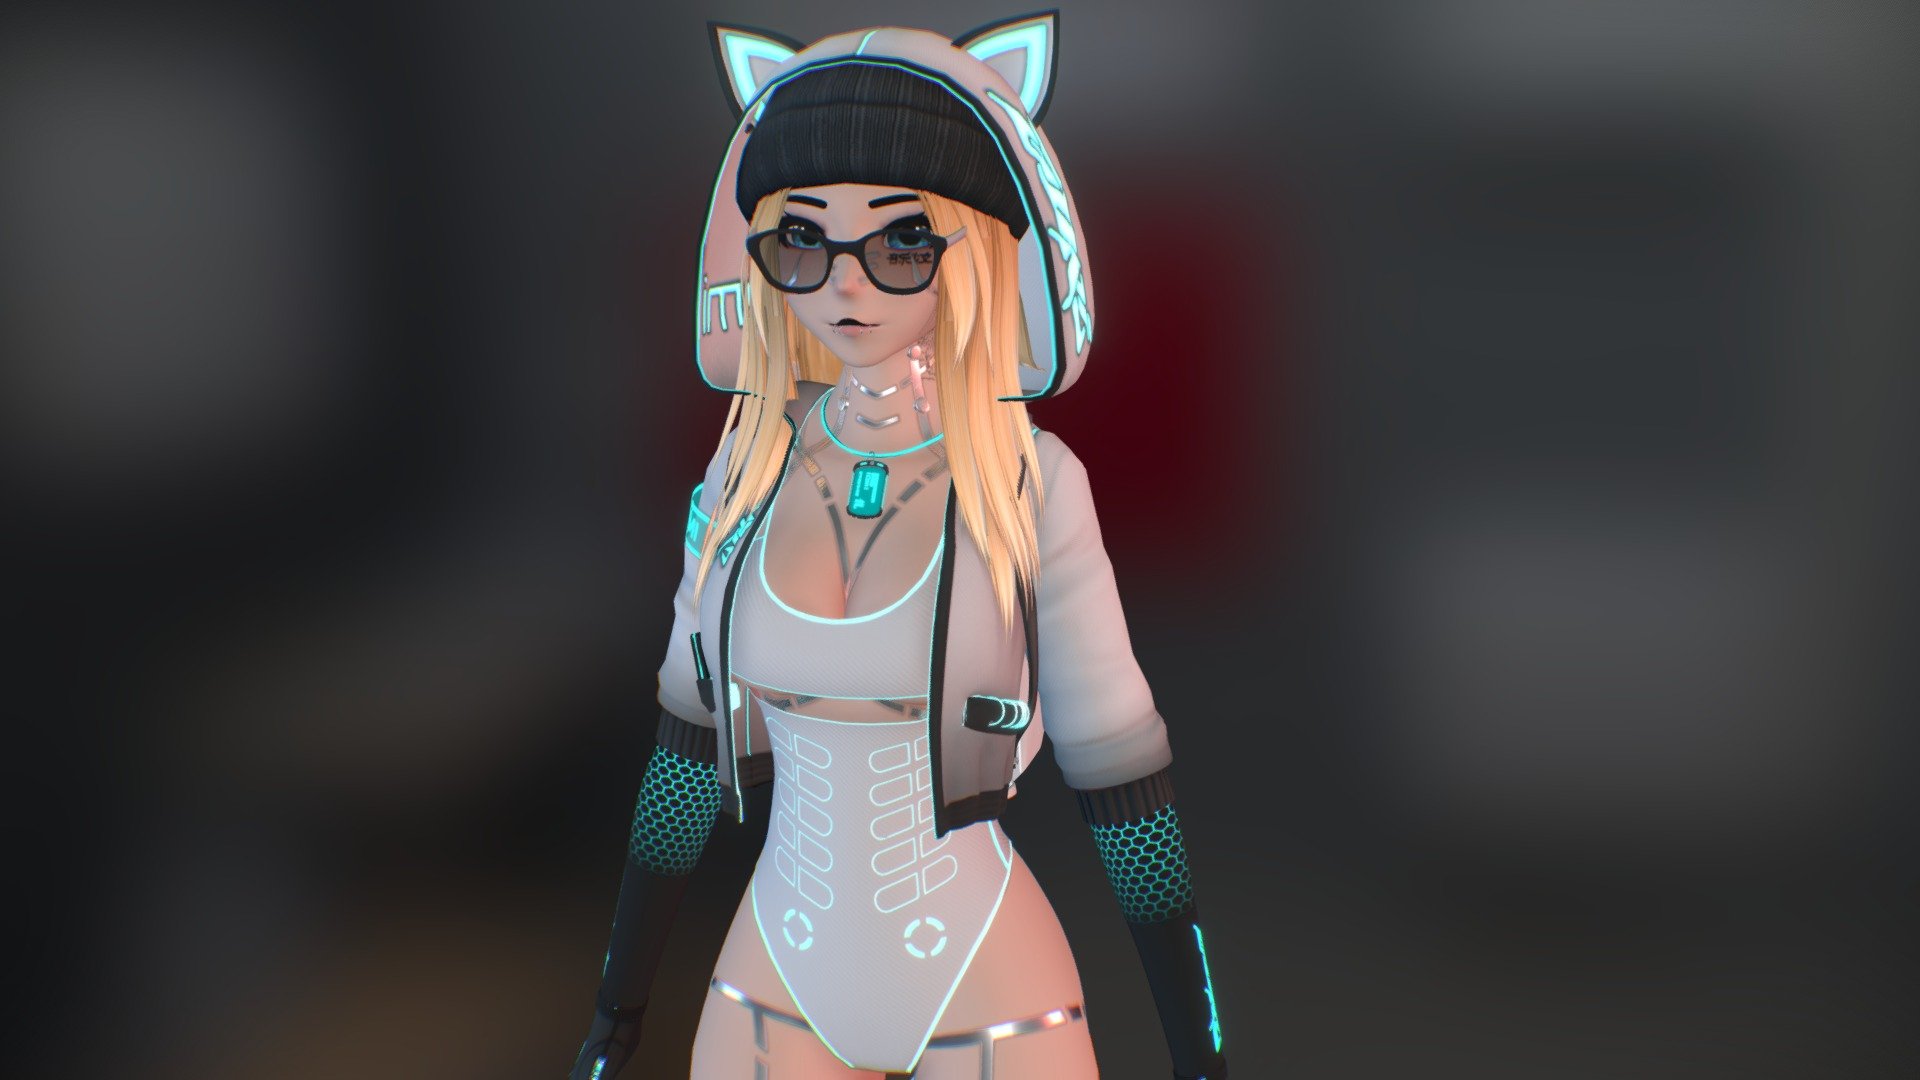 This is Remi by Cam.
This is a 3D Model Intended for use with VRChat. This Model is hosted in Sketchfab as a preview render to be embedded into the sales page 3d model